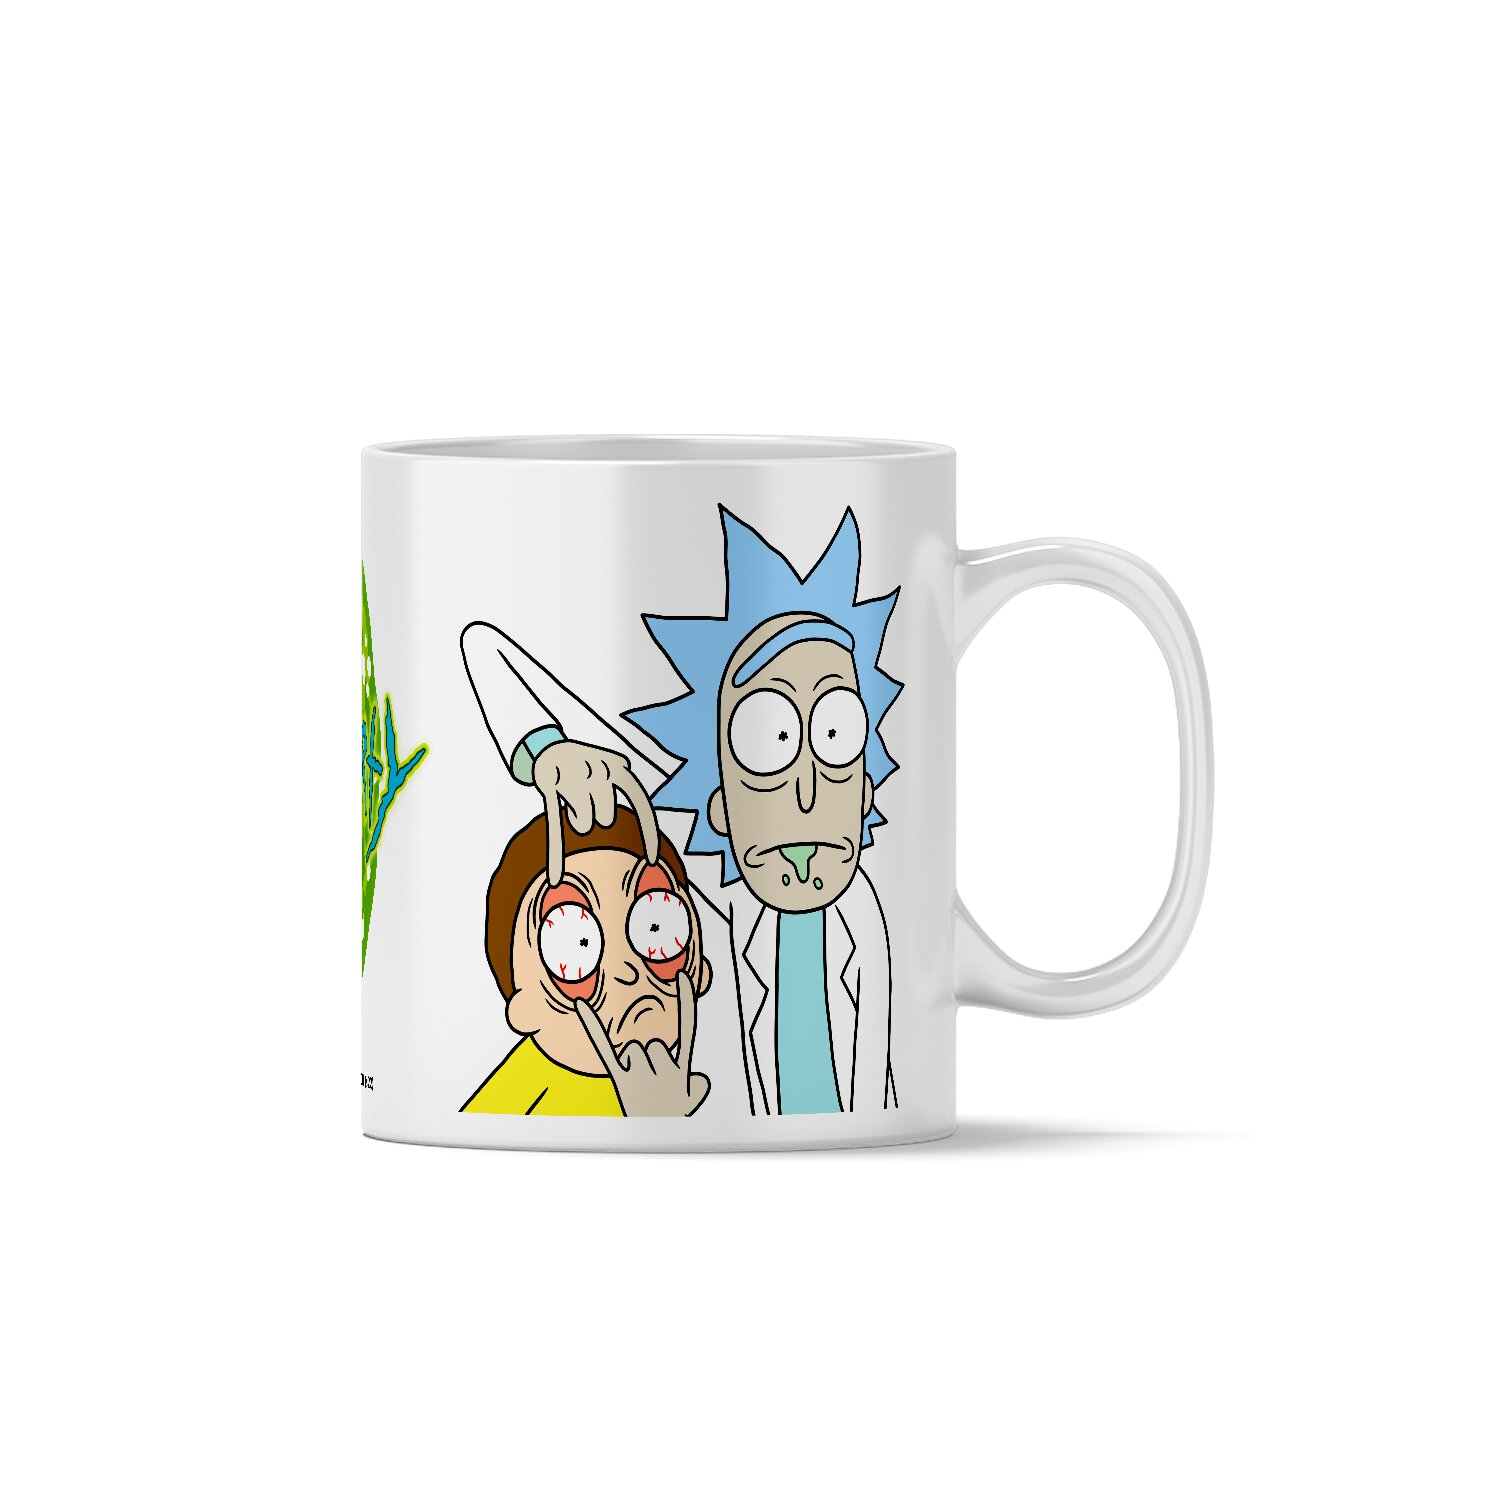 Rick and Morty Muster Morty 007 Kaffee- Teebecher 330ml und